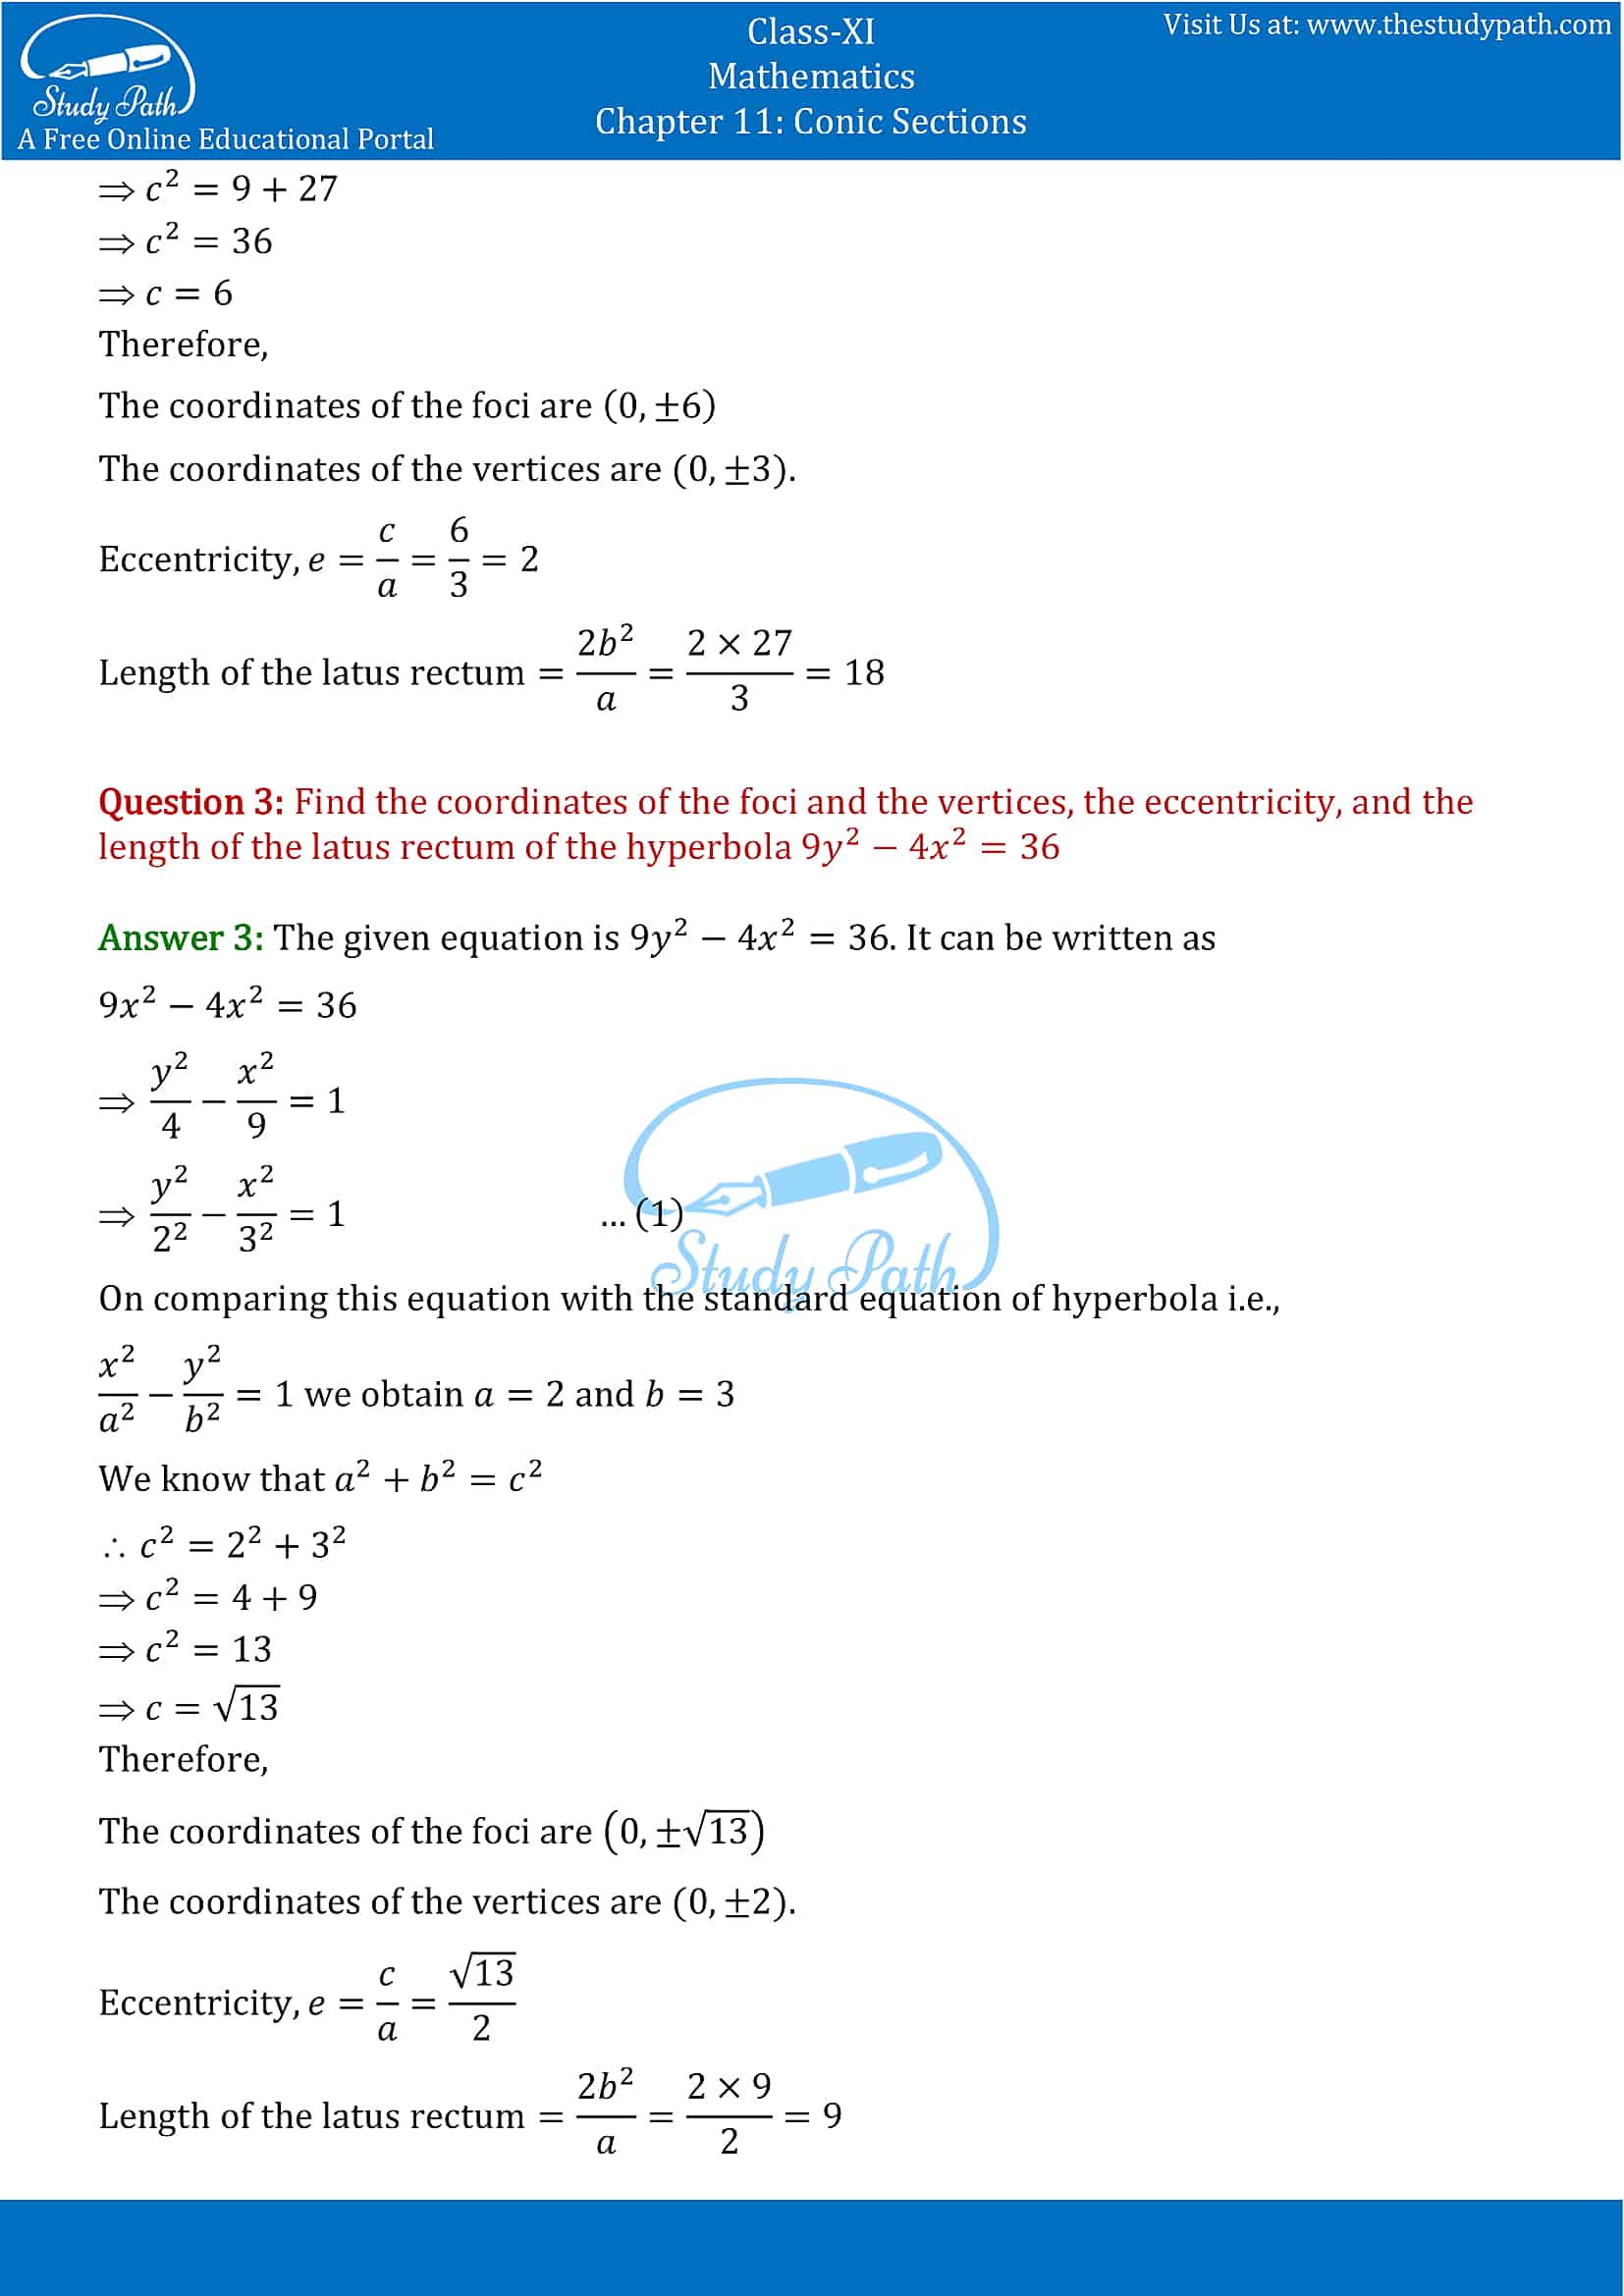 NCERT Solutions for Class 11 Maths chapter 11 Conic Section Exercise 11.4 Part-2